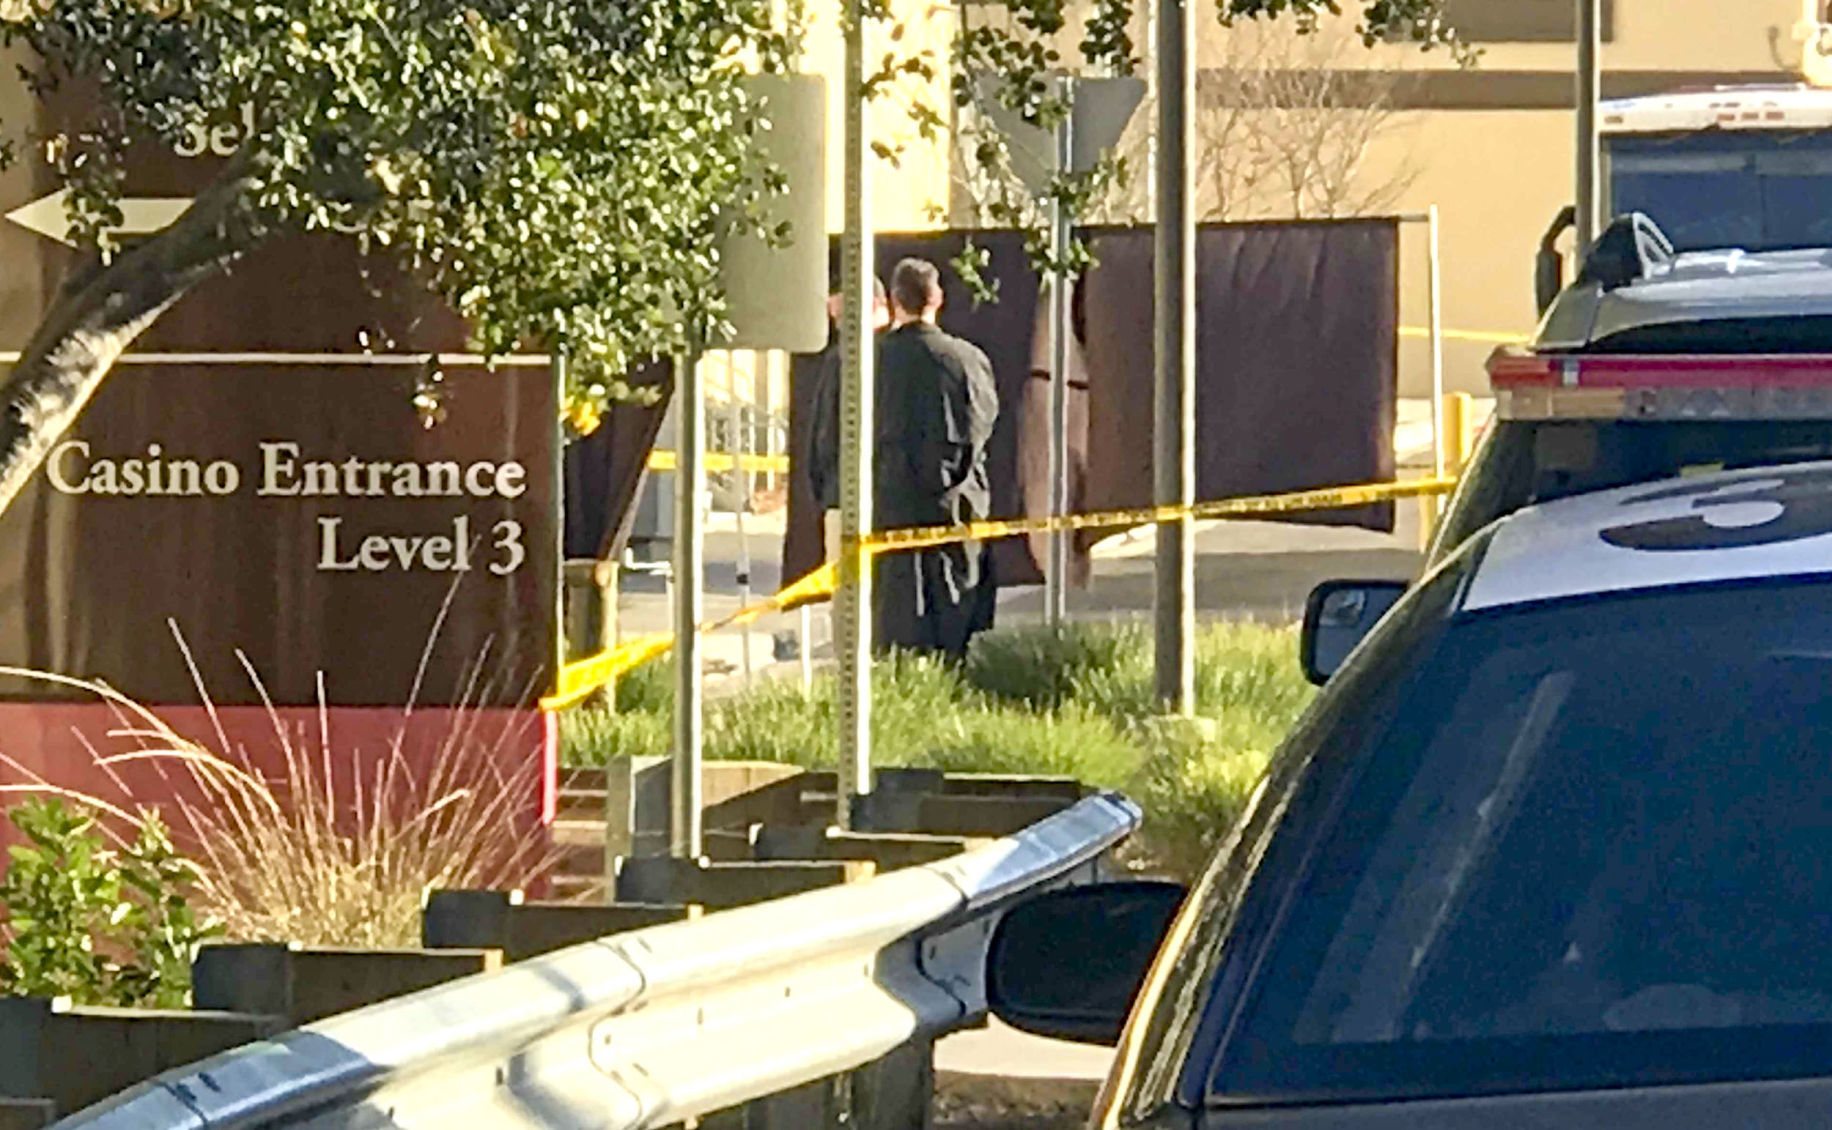 chumash casino shooting security officer name